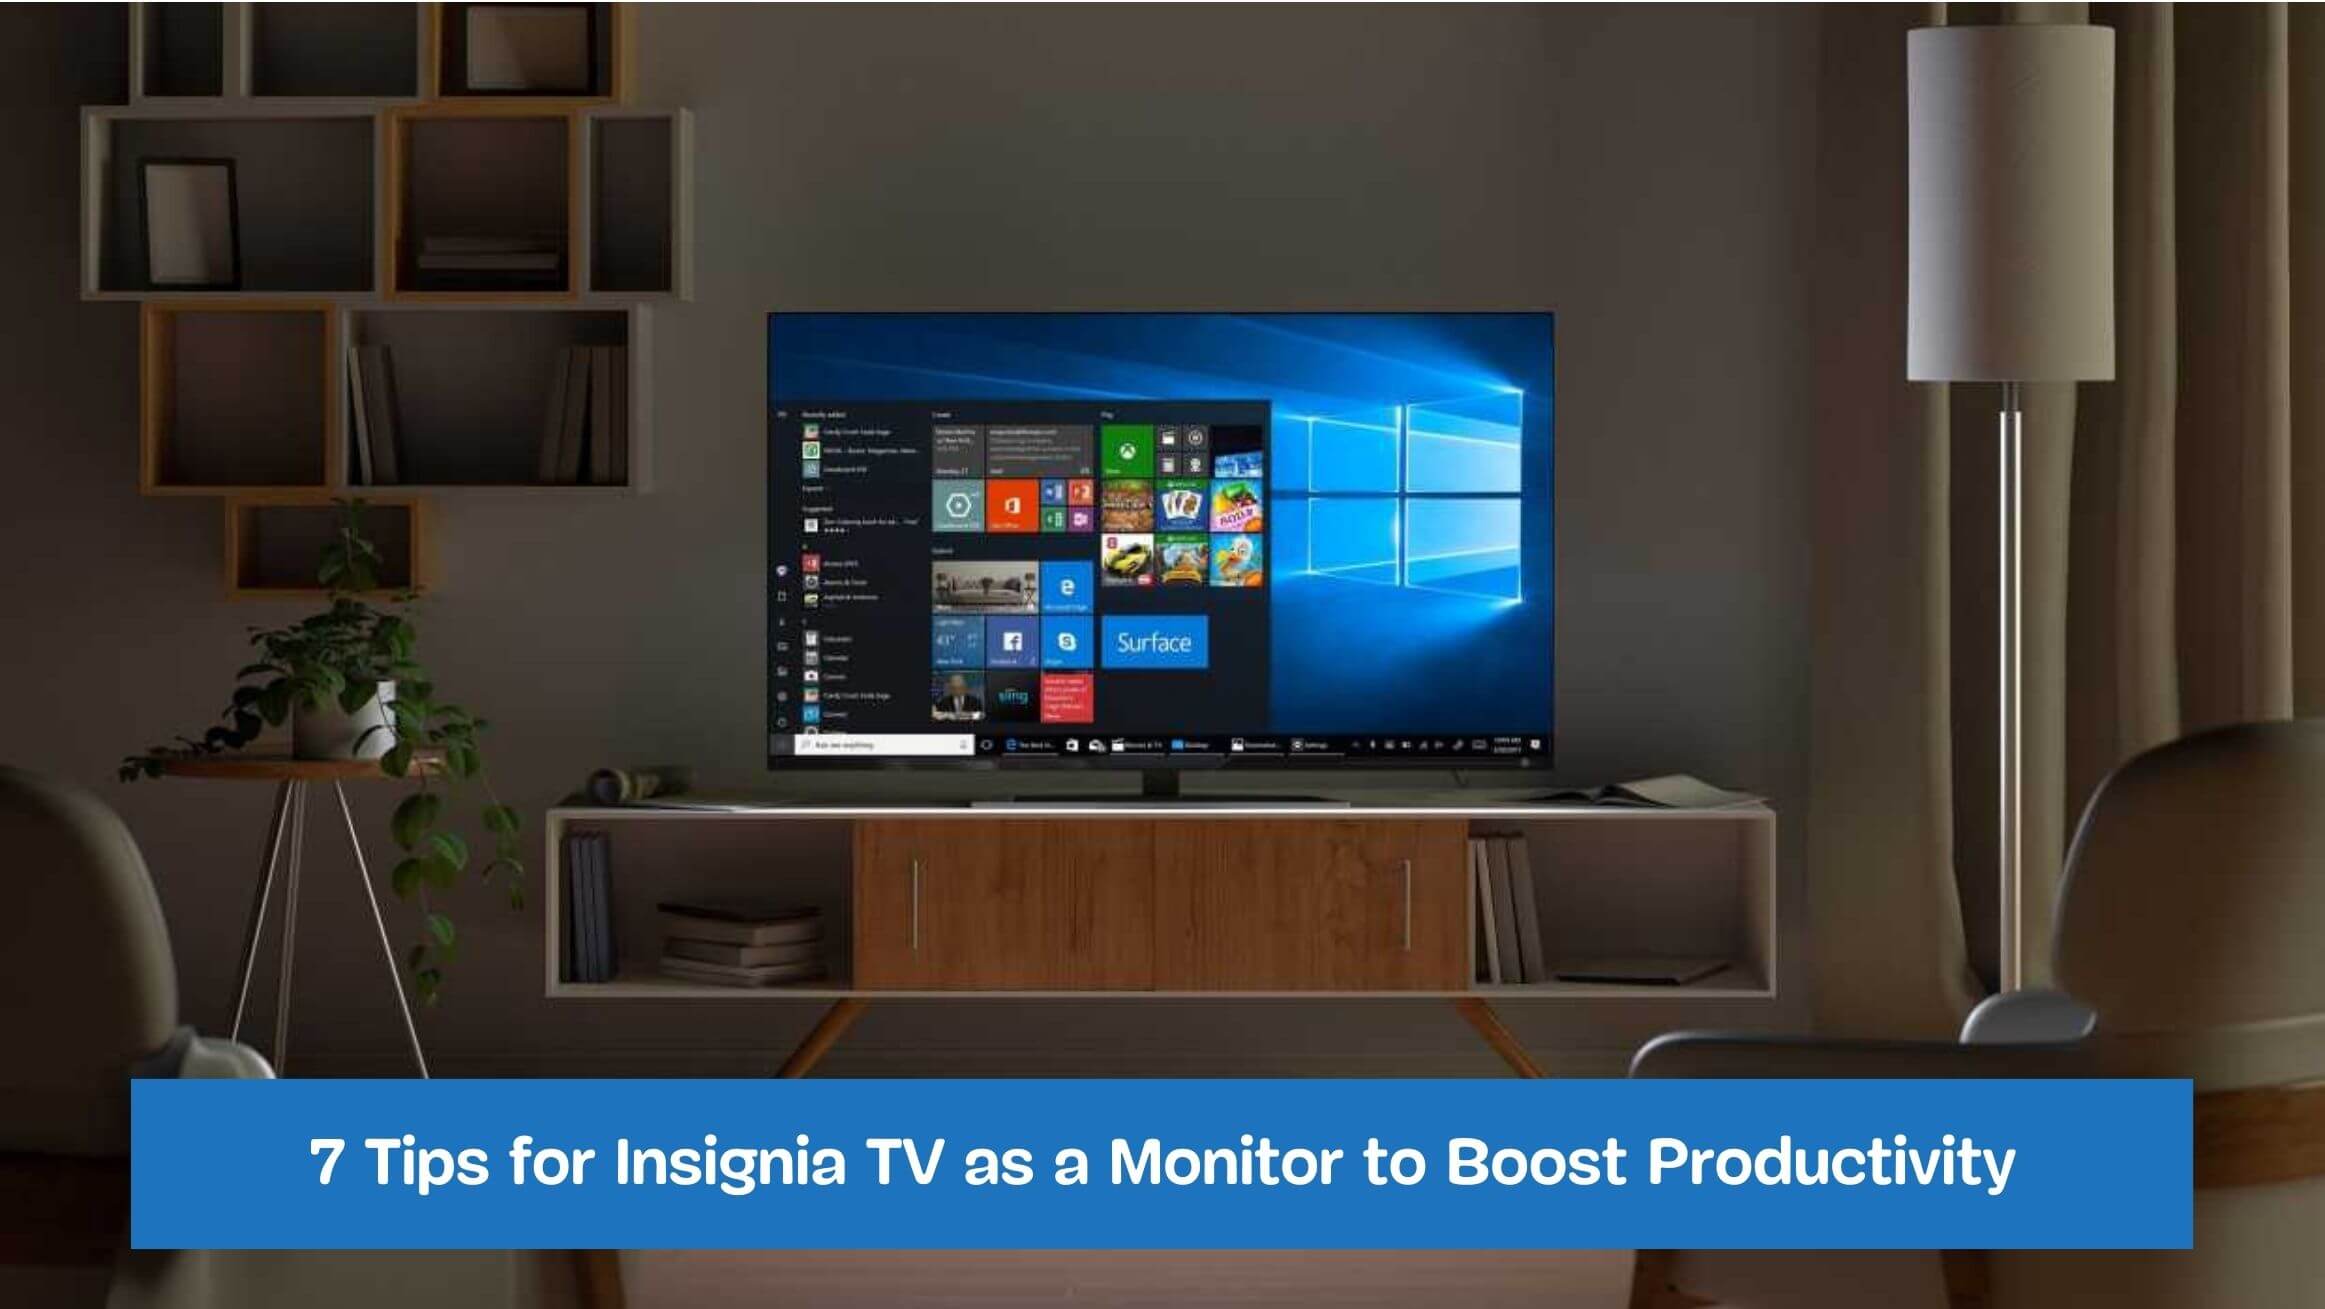 7 Tips for Insignia TV as a Monitor to Boost Productivity